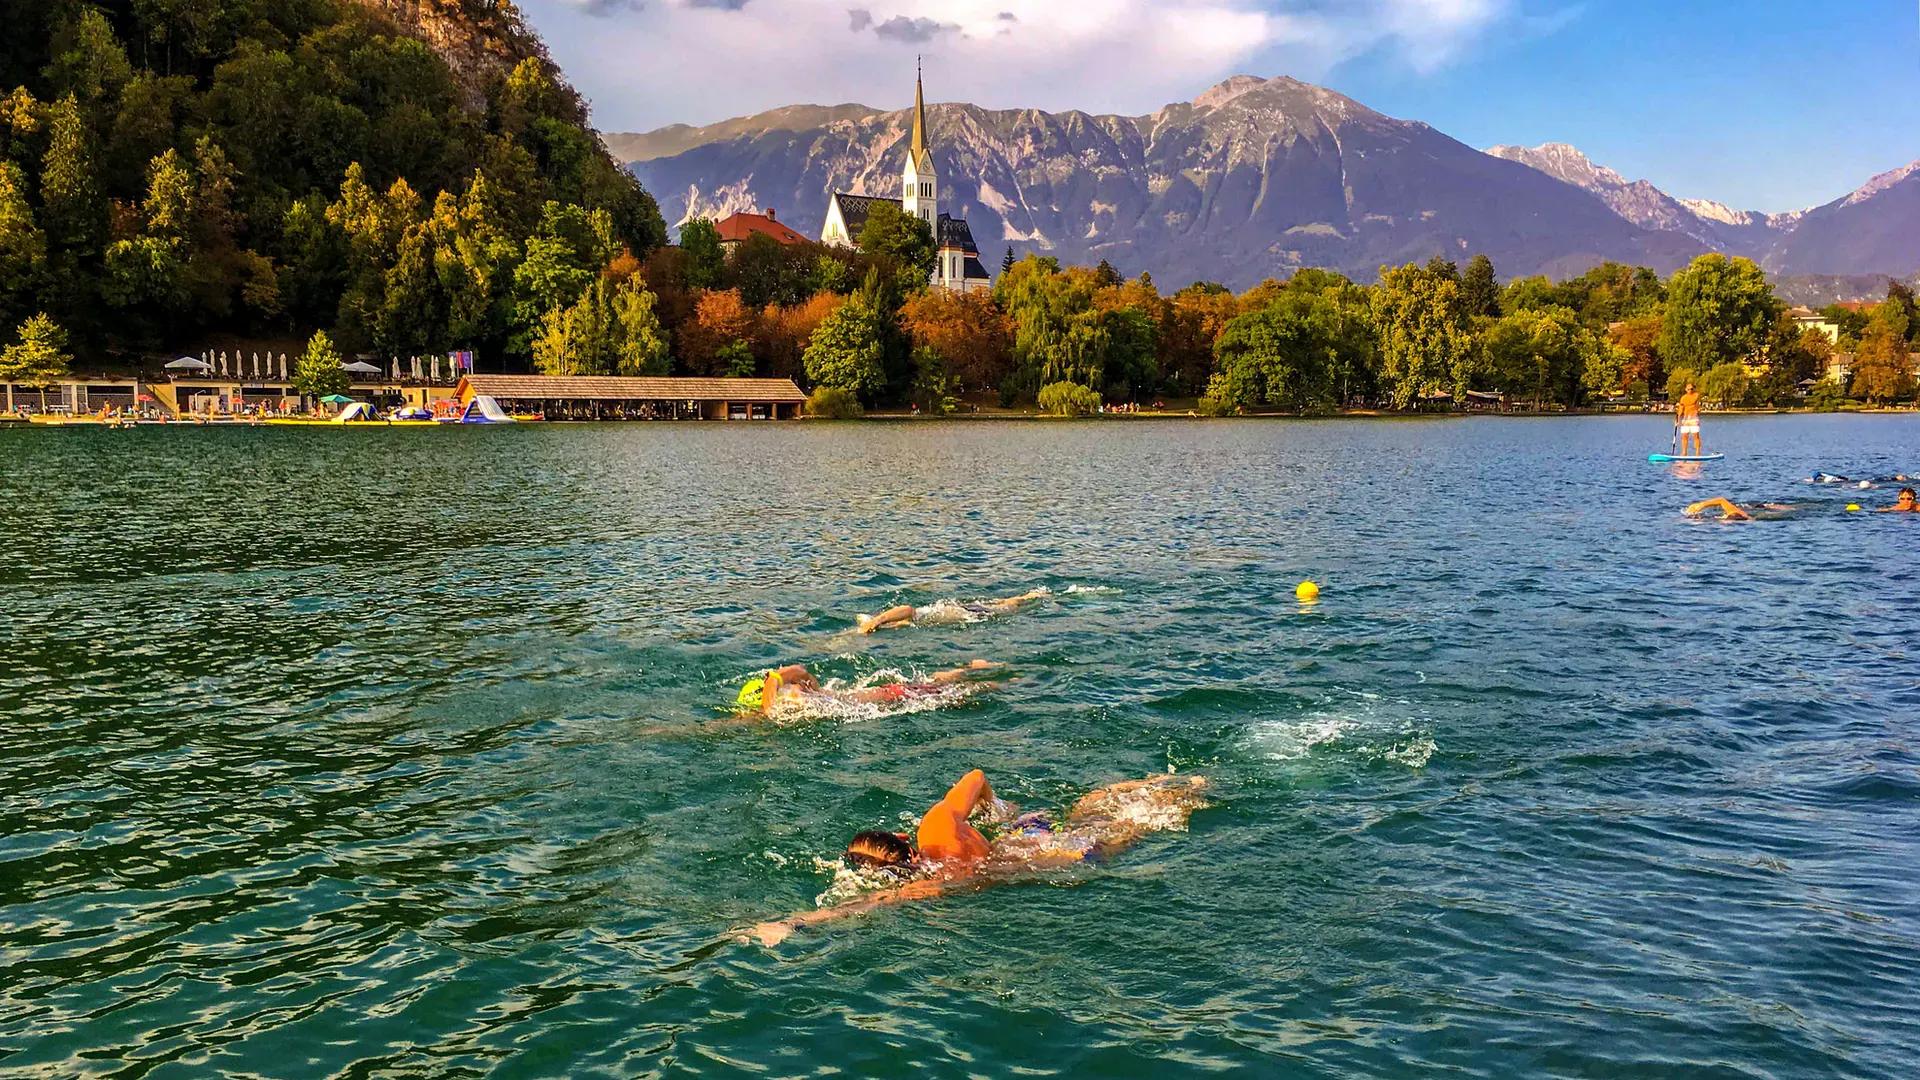 Swimmers in Lake Bled, Slovenia